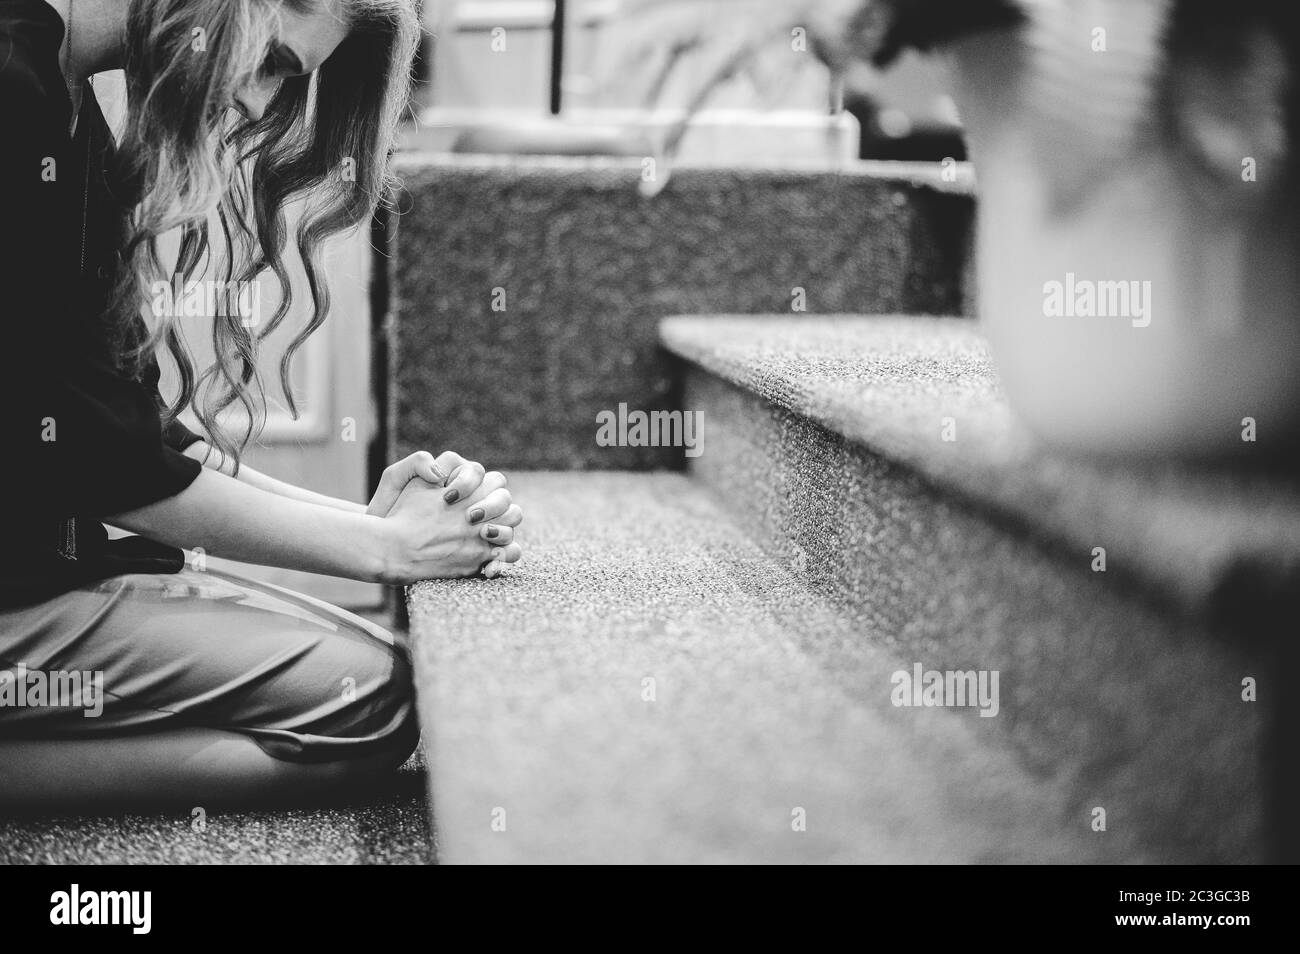 Woman at the front of a church kneeling down and praying Stock Photo